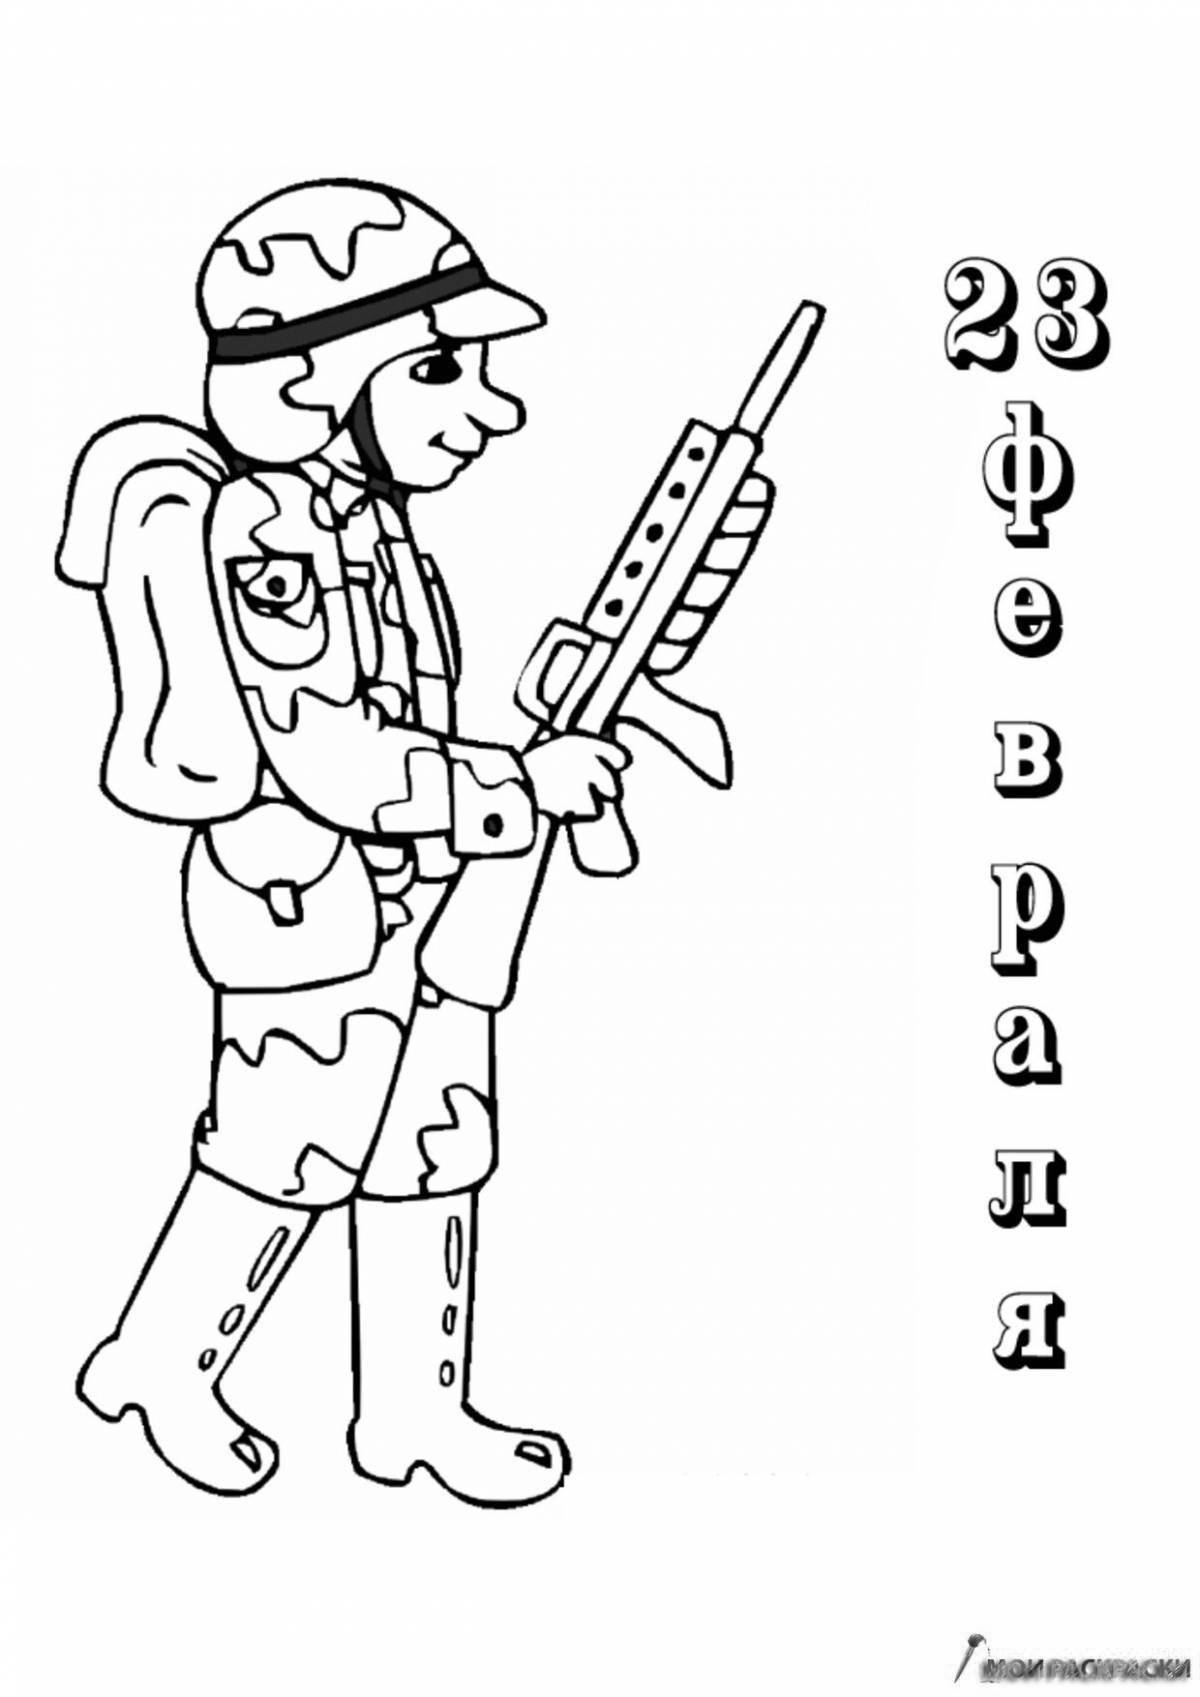 Amusing soldier coloring book for children 3-4 years old